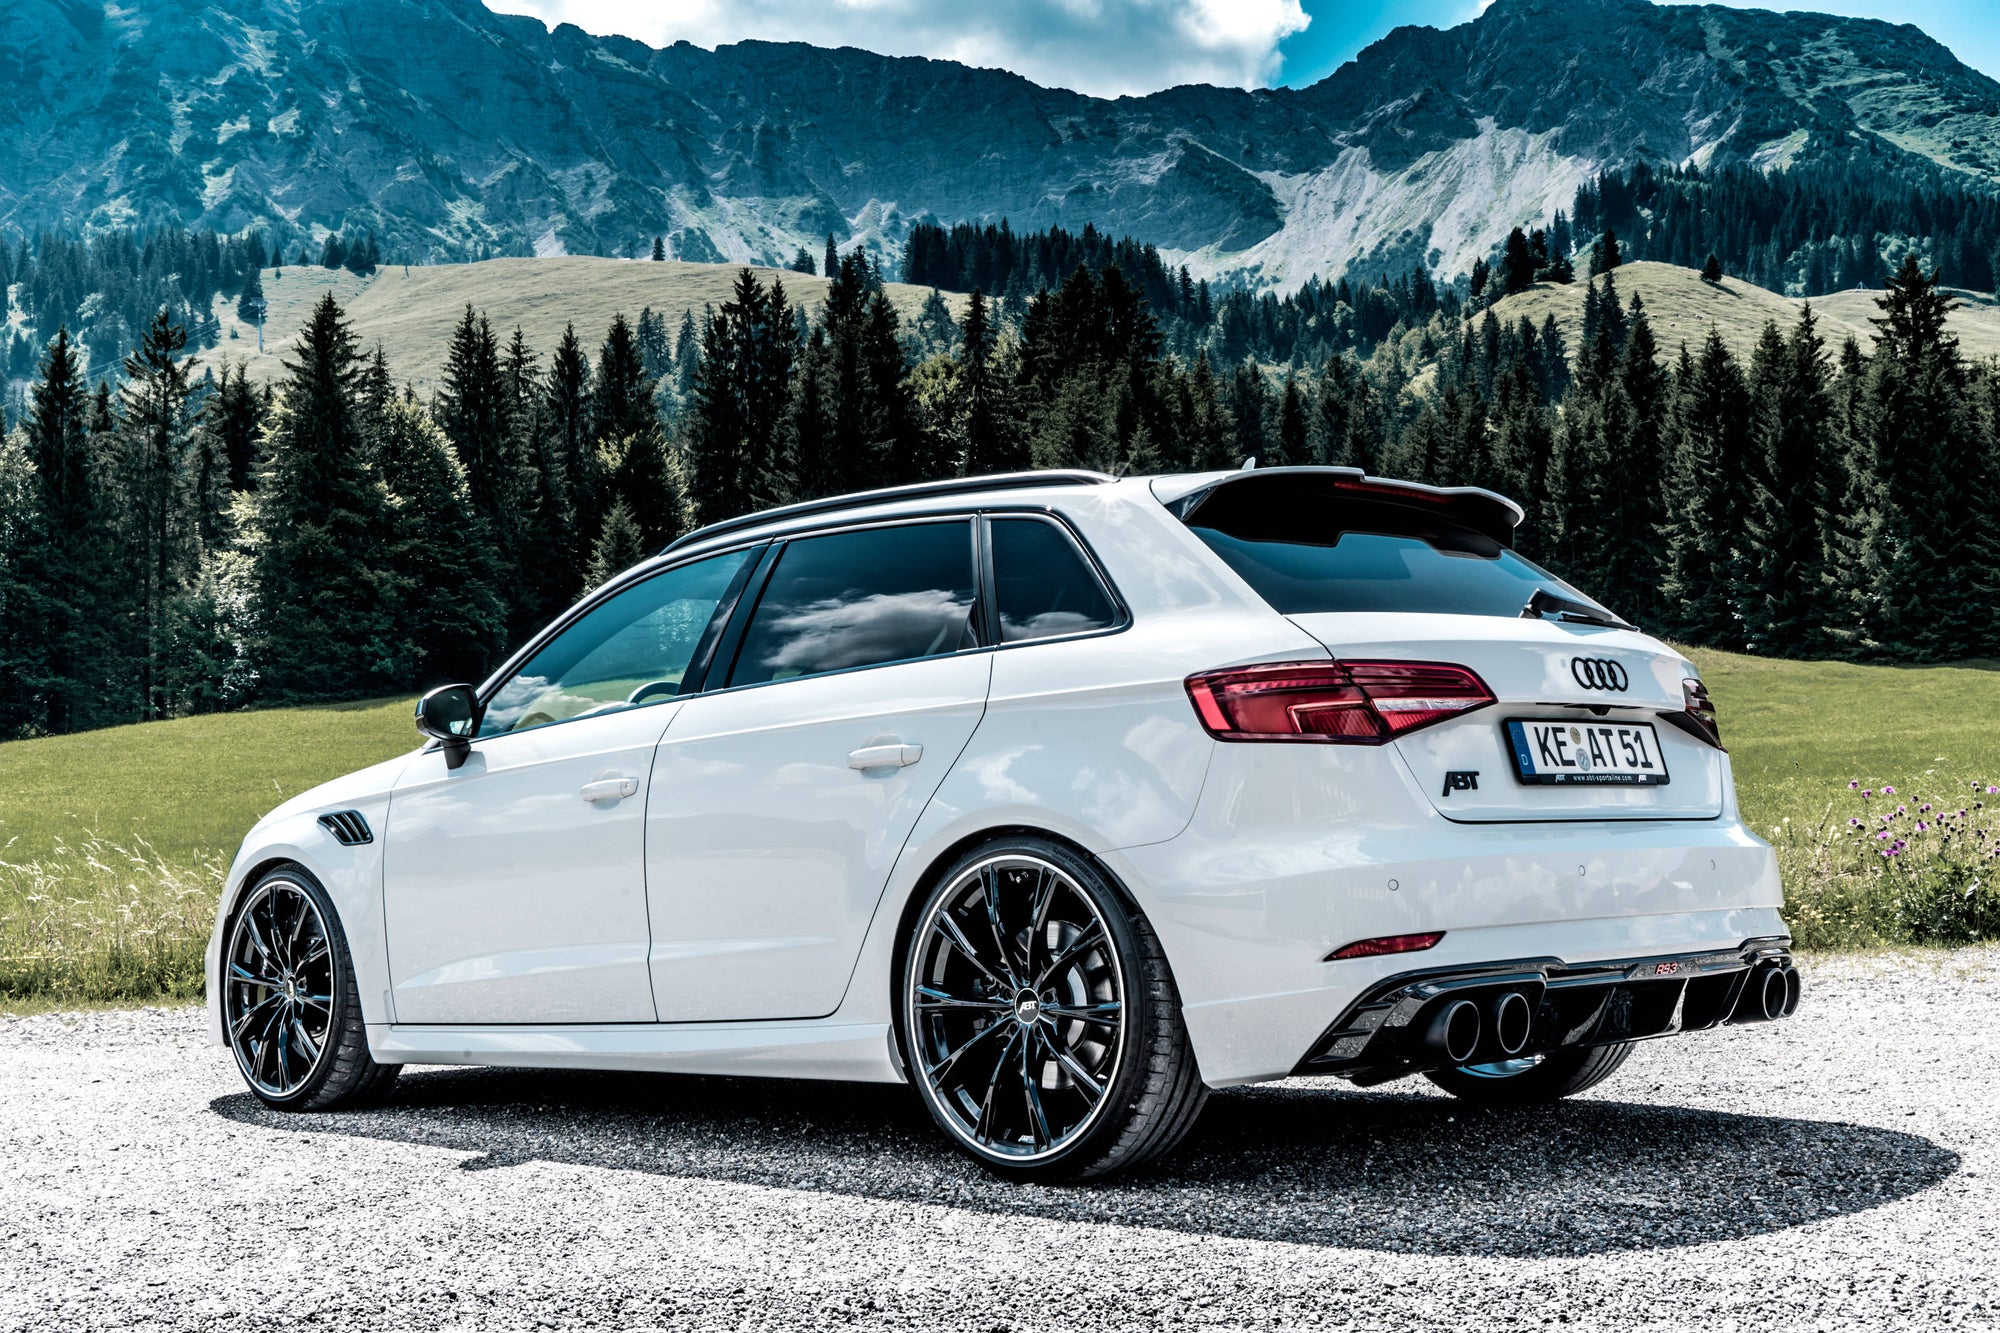 Why Performance Mod the Audi RS3